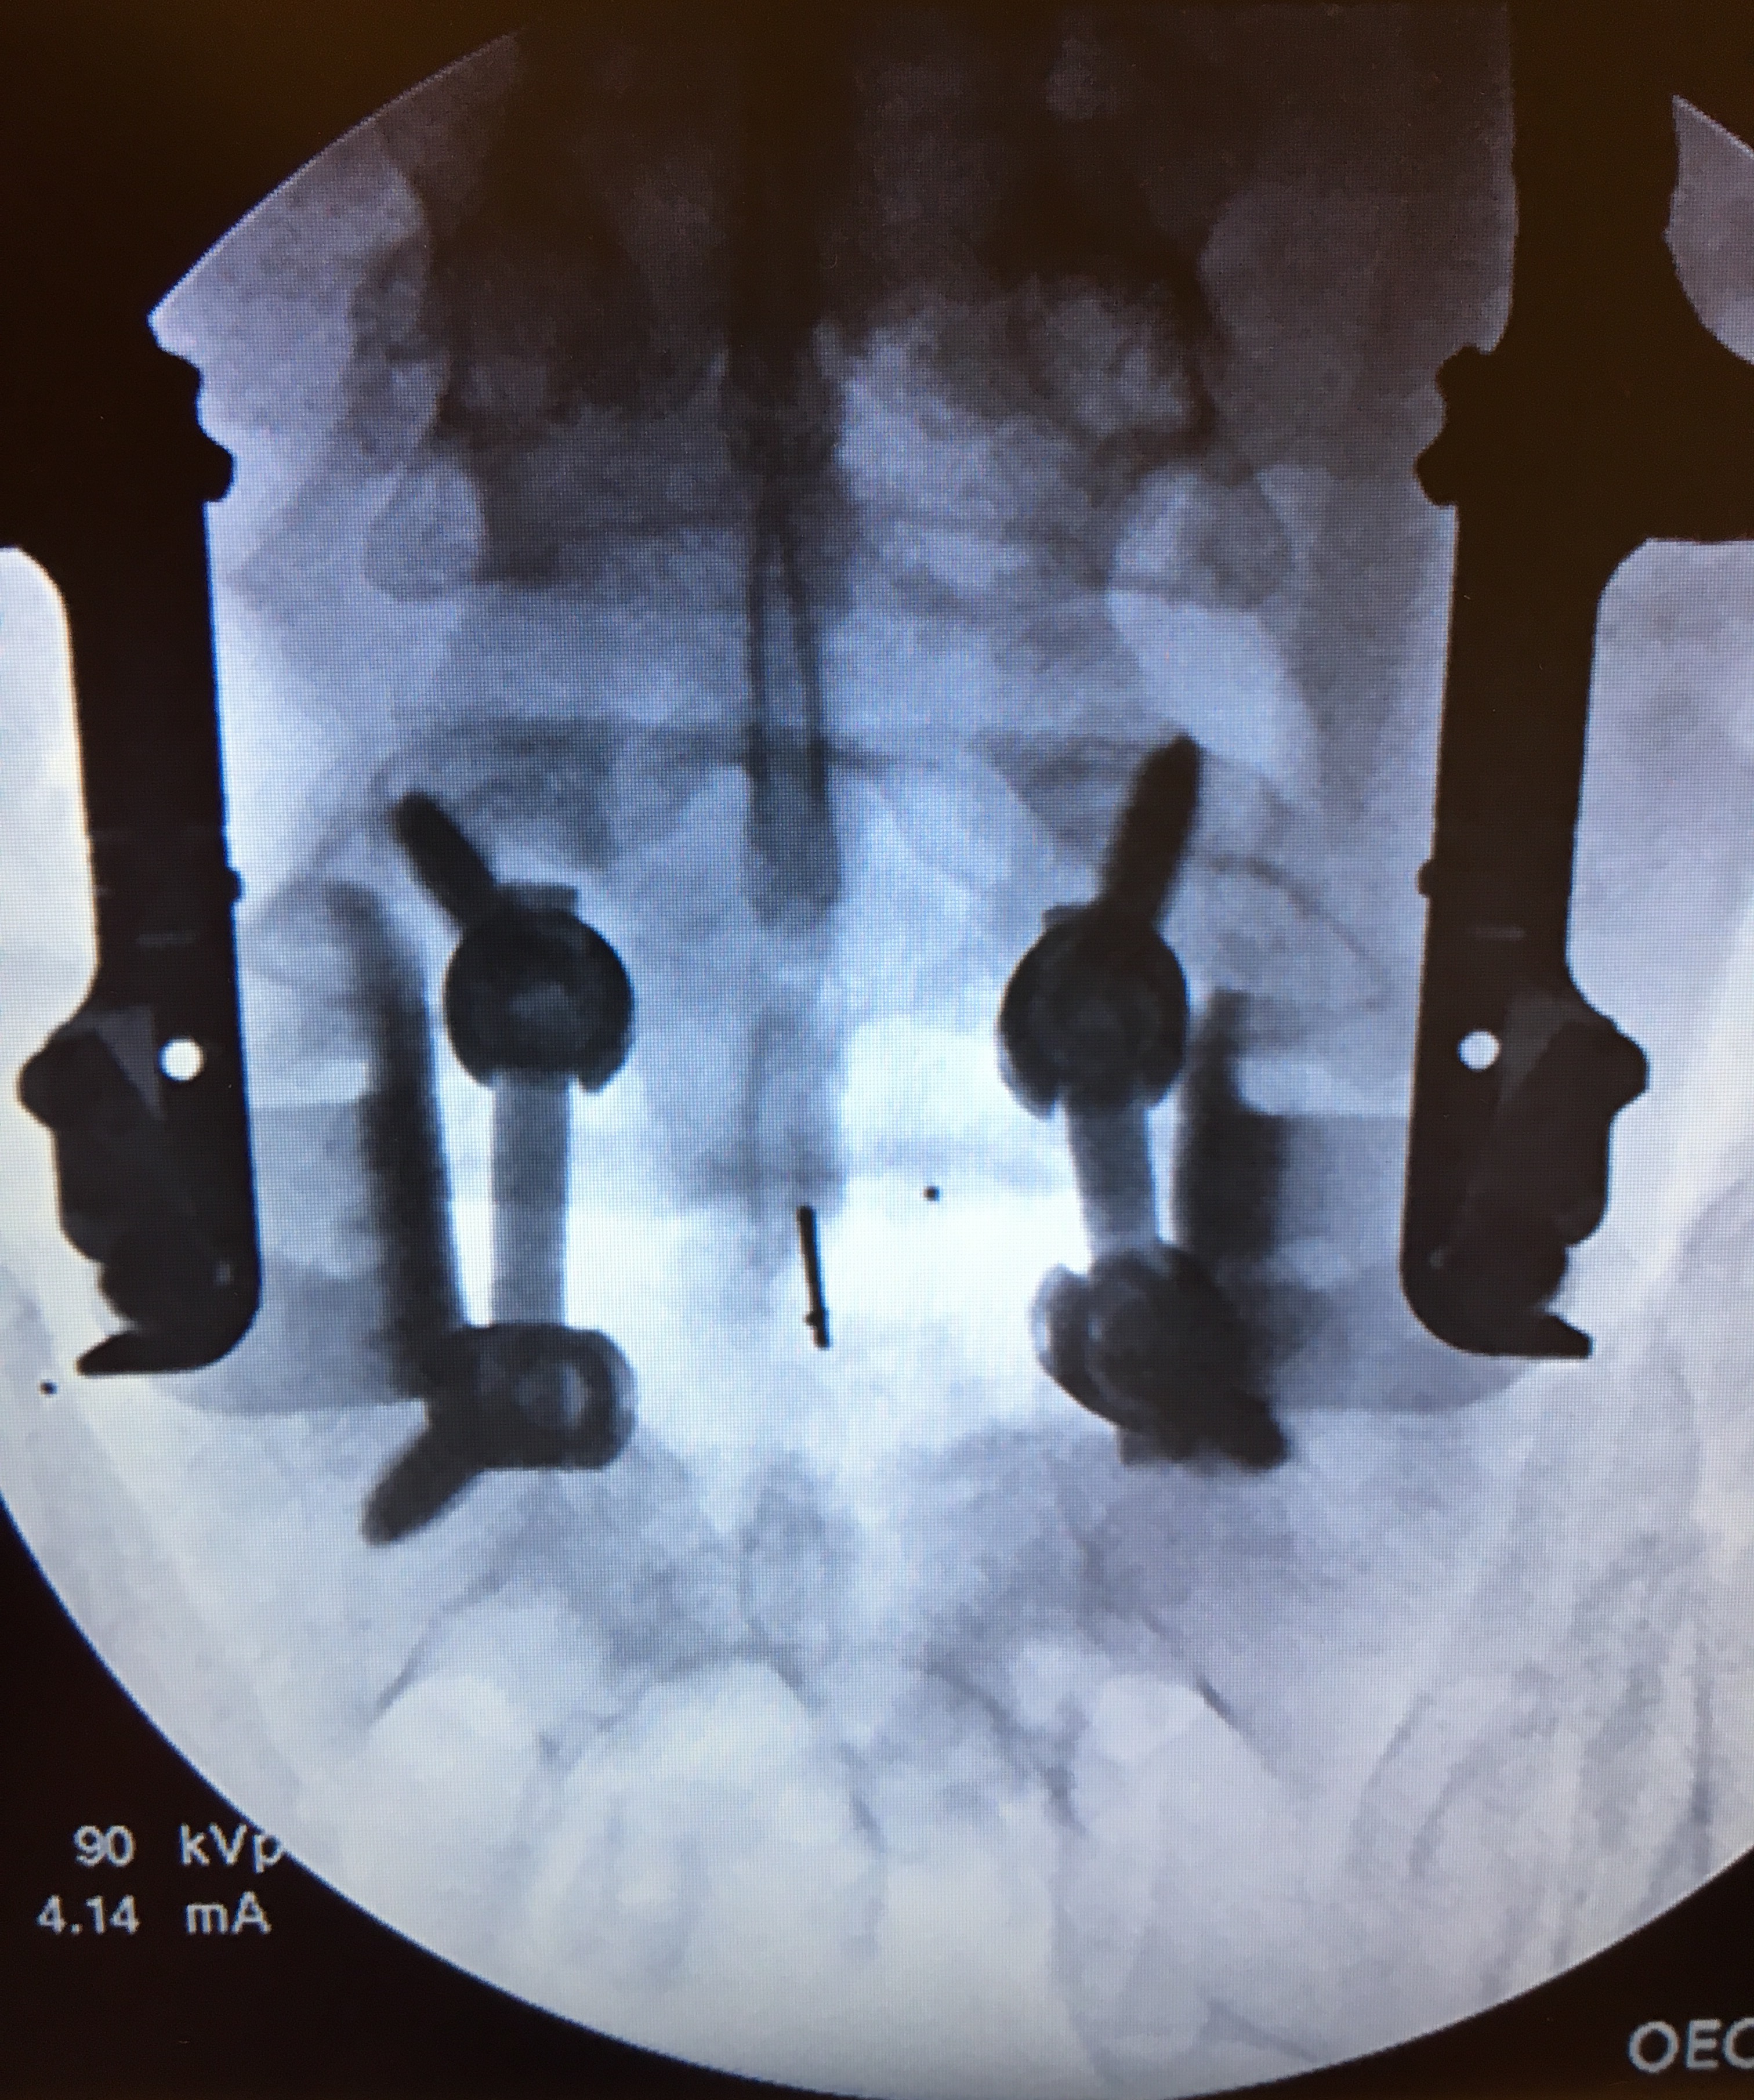 Final construct, with pedicle screws and PLIFT Implant